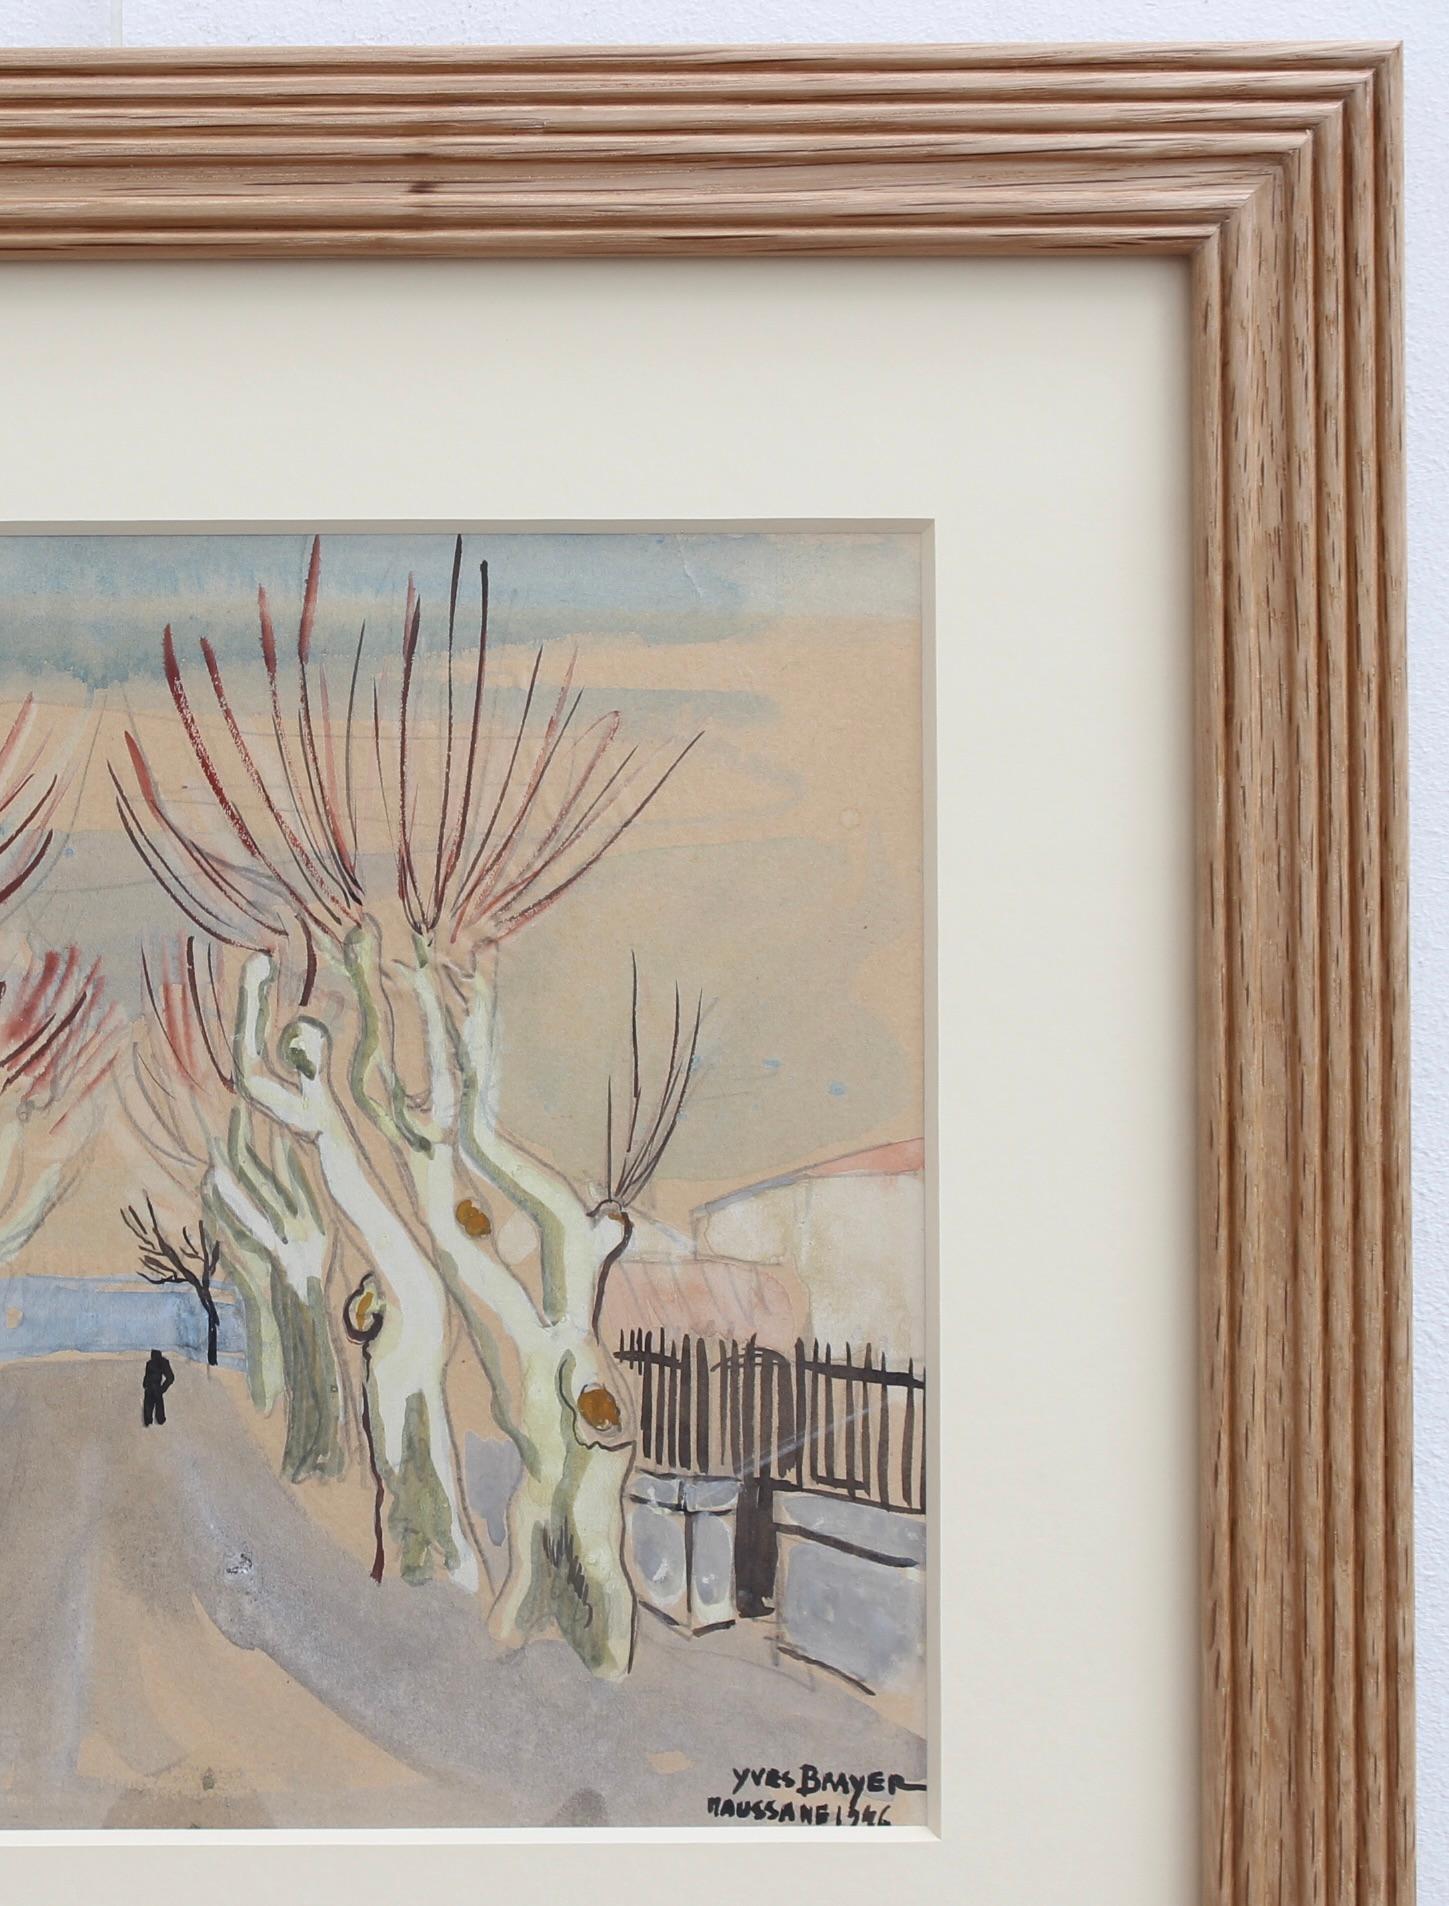 Row of Plane Trees In Winter - Maussane-les-Alpilles - Expressionist Painting by Yves Brayer